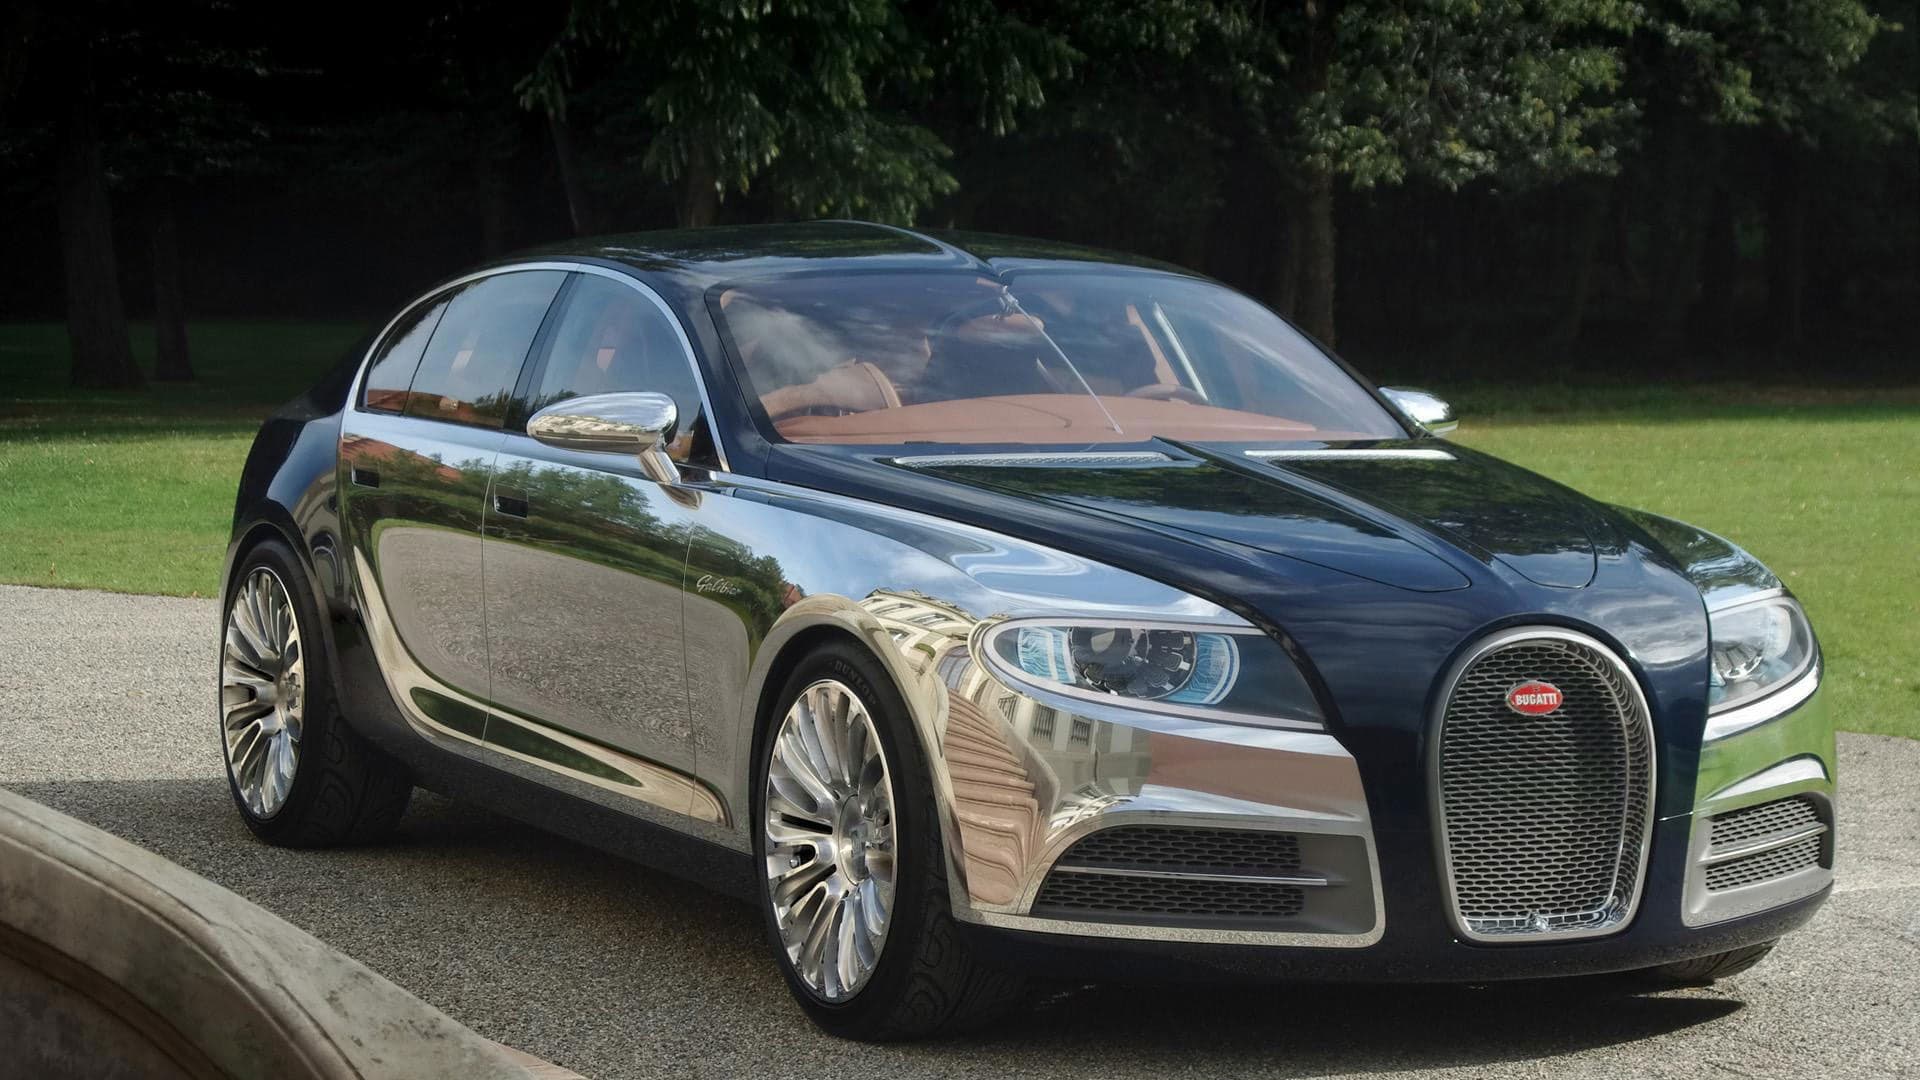 Bugatti Hasn’t Forgotten About the Galibier, CEO Says